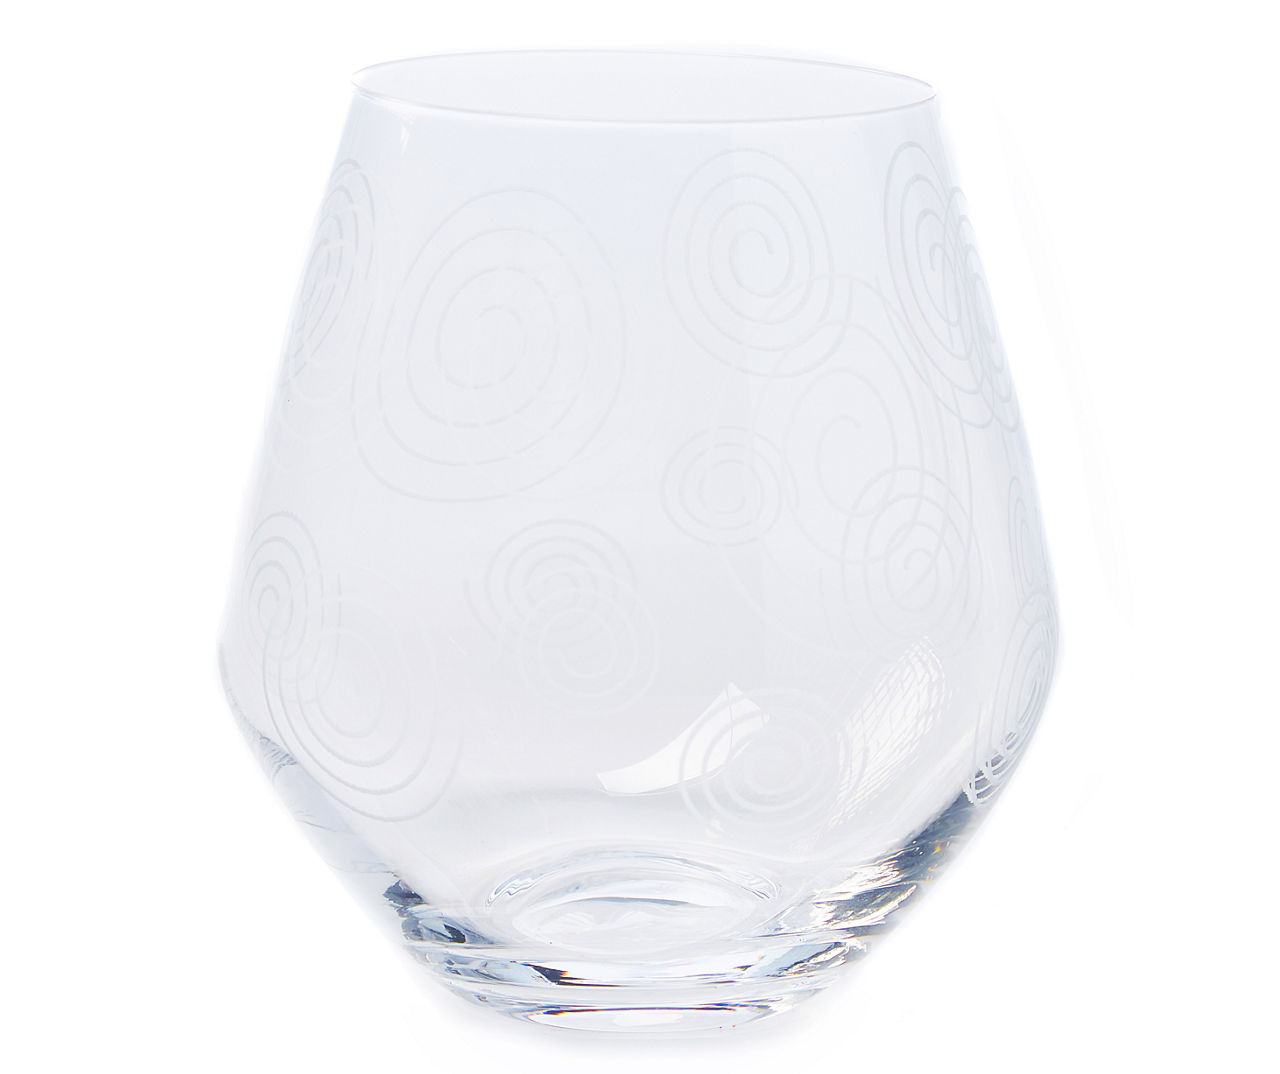 Etched Fish Sea Themed White Wine Stemless Wine Glasses, 10 oz, Set of 4